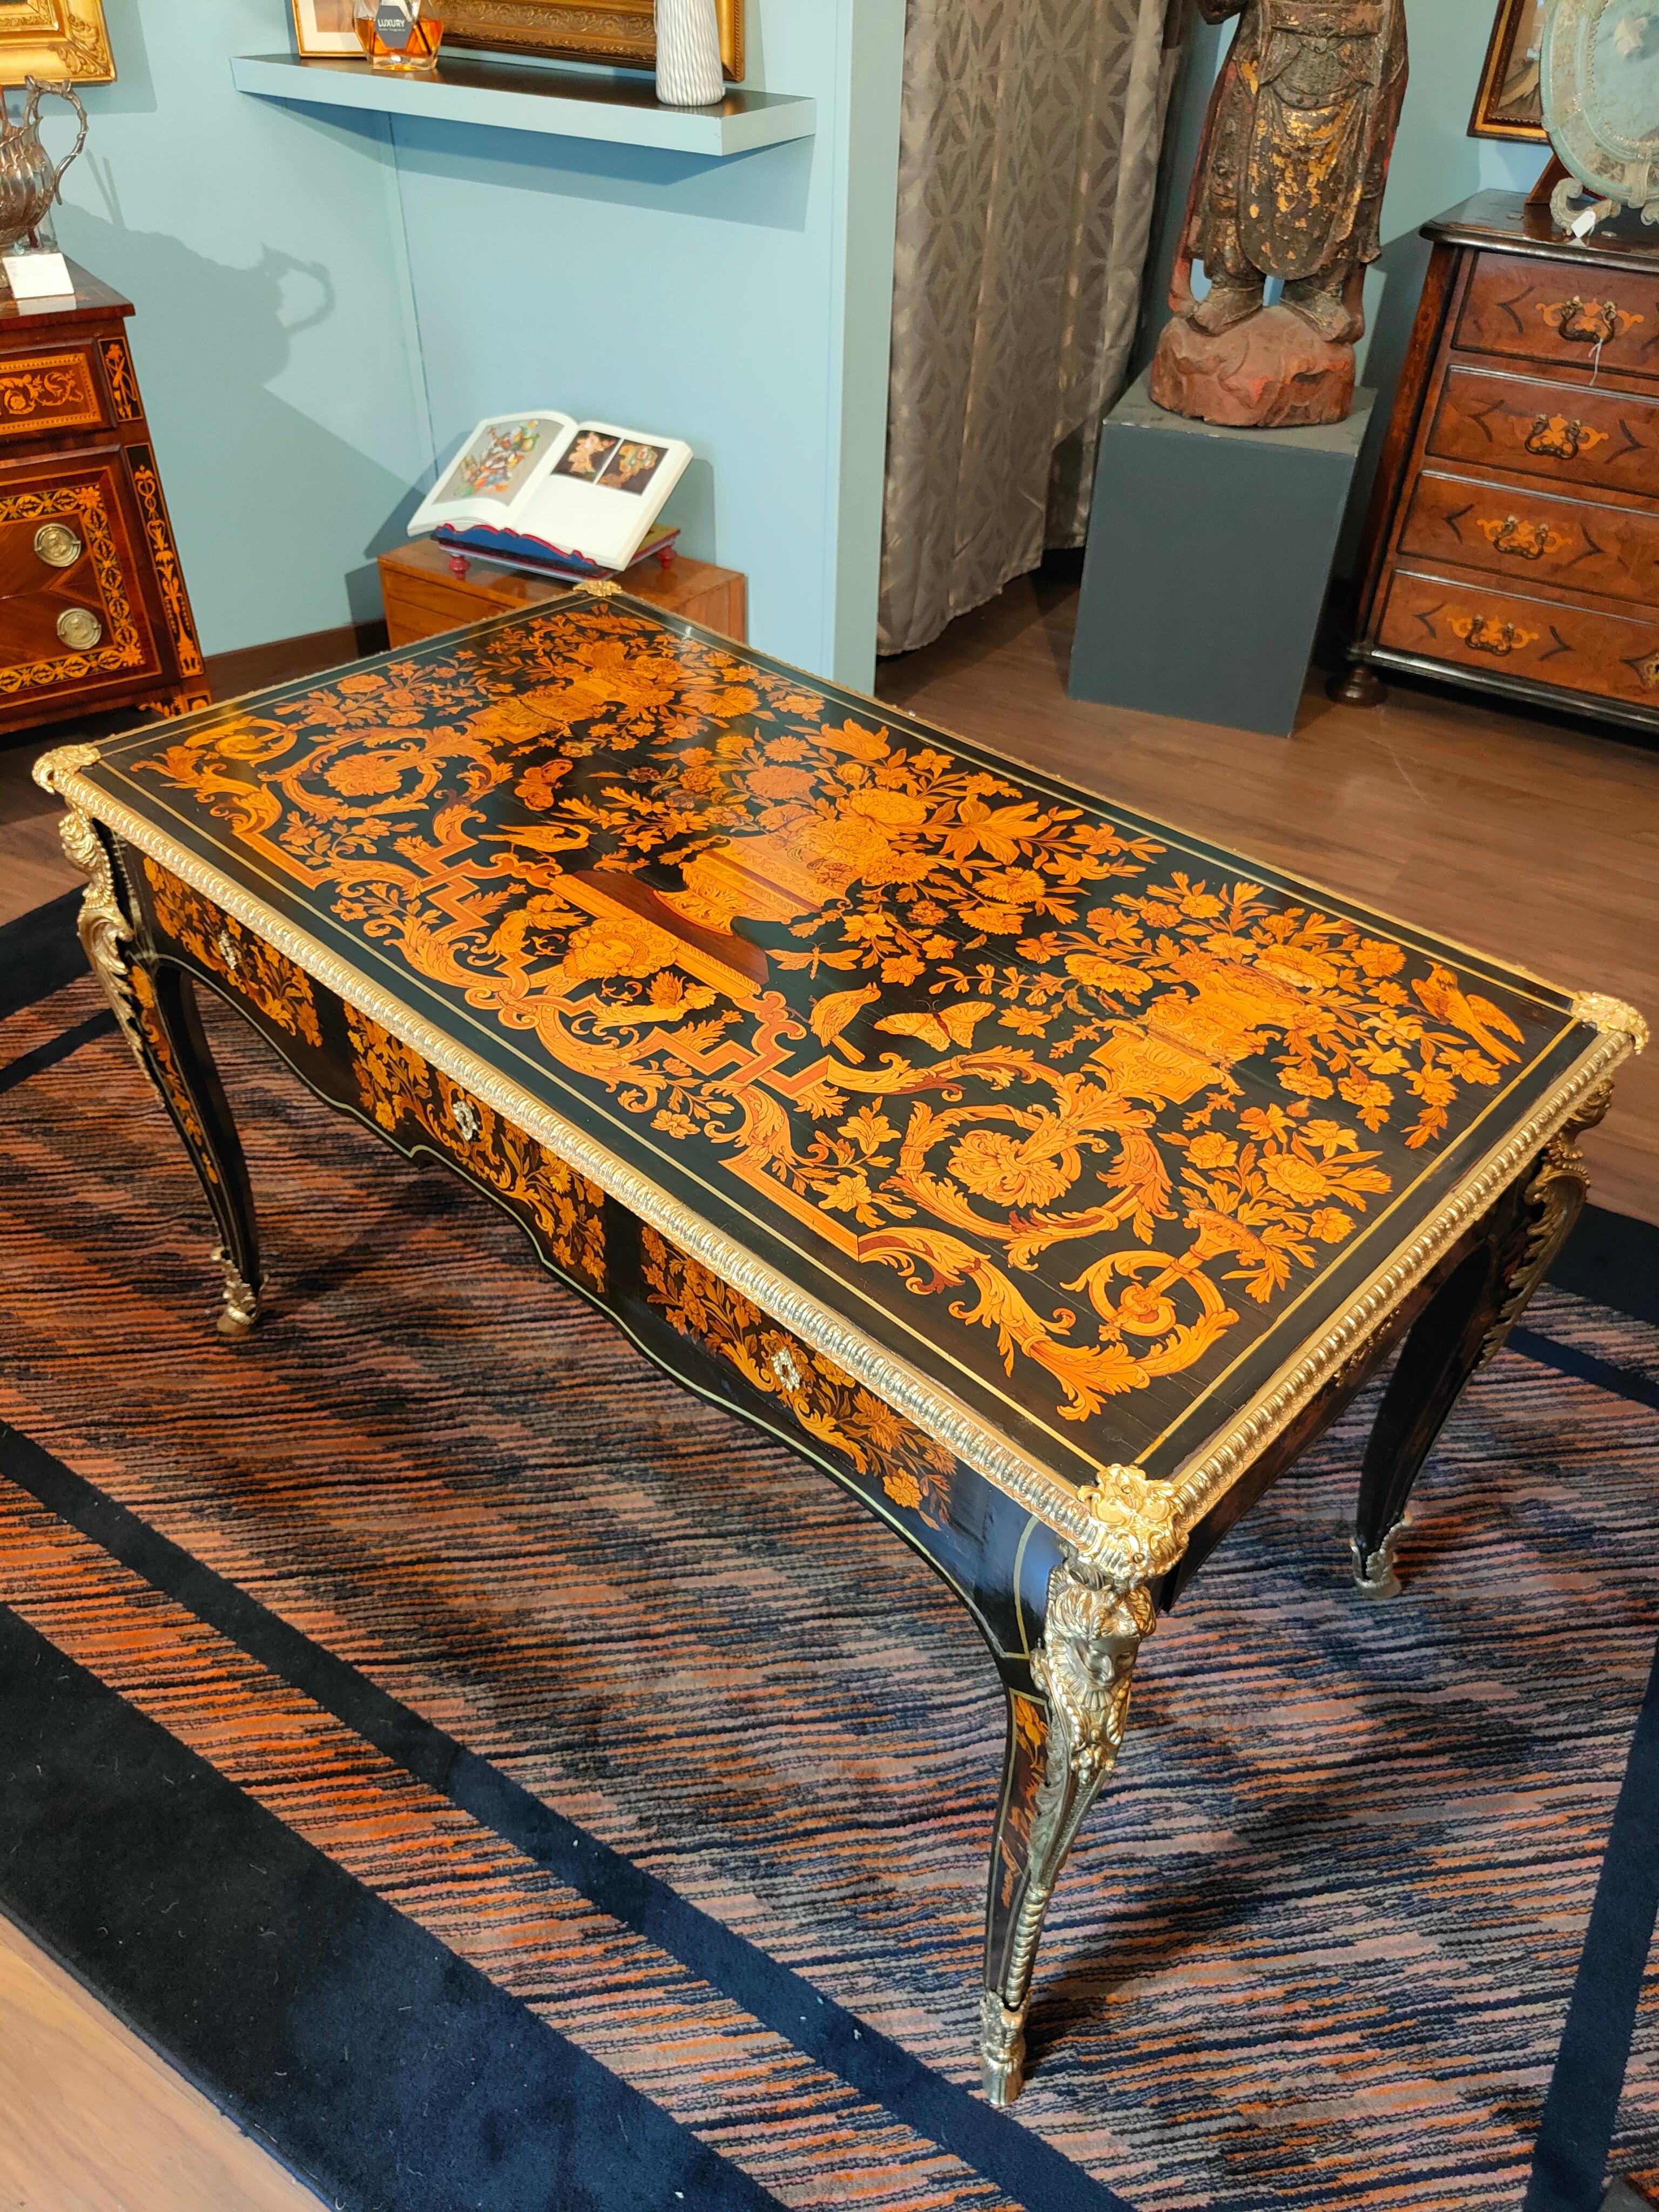 Important rectangular desk table, finely inlaid in various woods.
The table top is made up of several vases with flowers that alternate with floral elements, animals, butterflies and birds. The different floral and geometric shapes are then